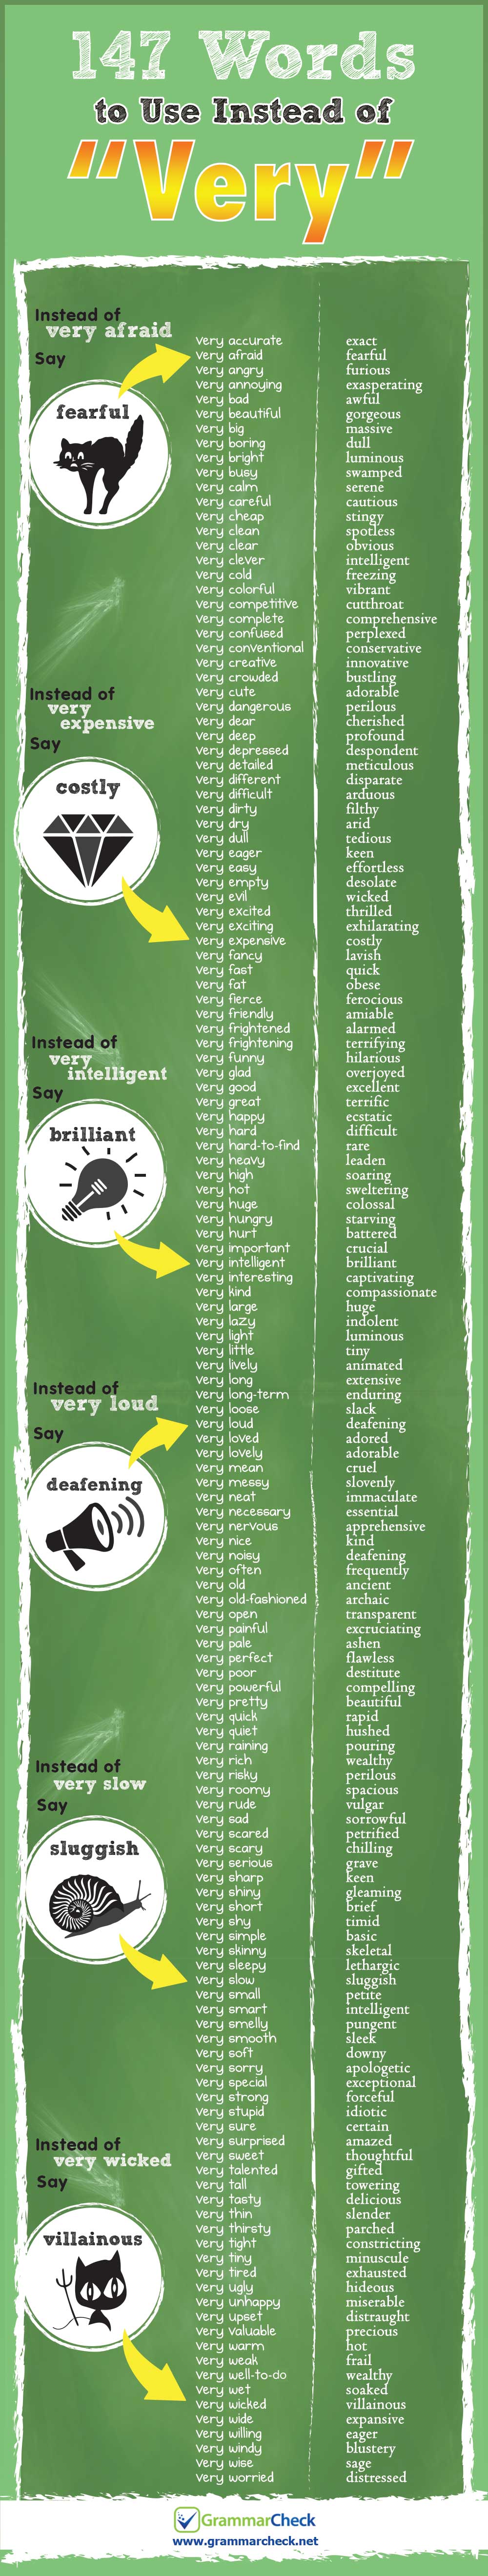 147 Words to Use Instead of 'Very' (Infographic)